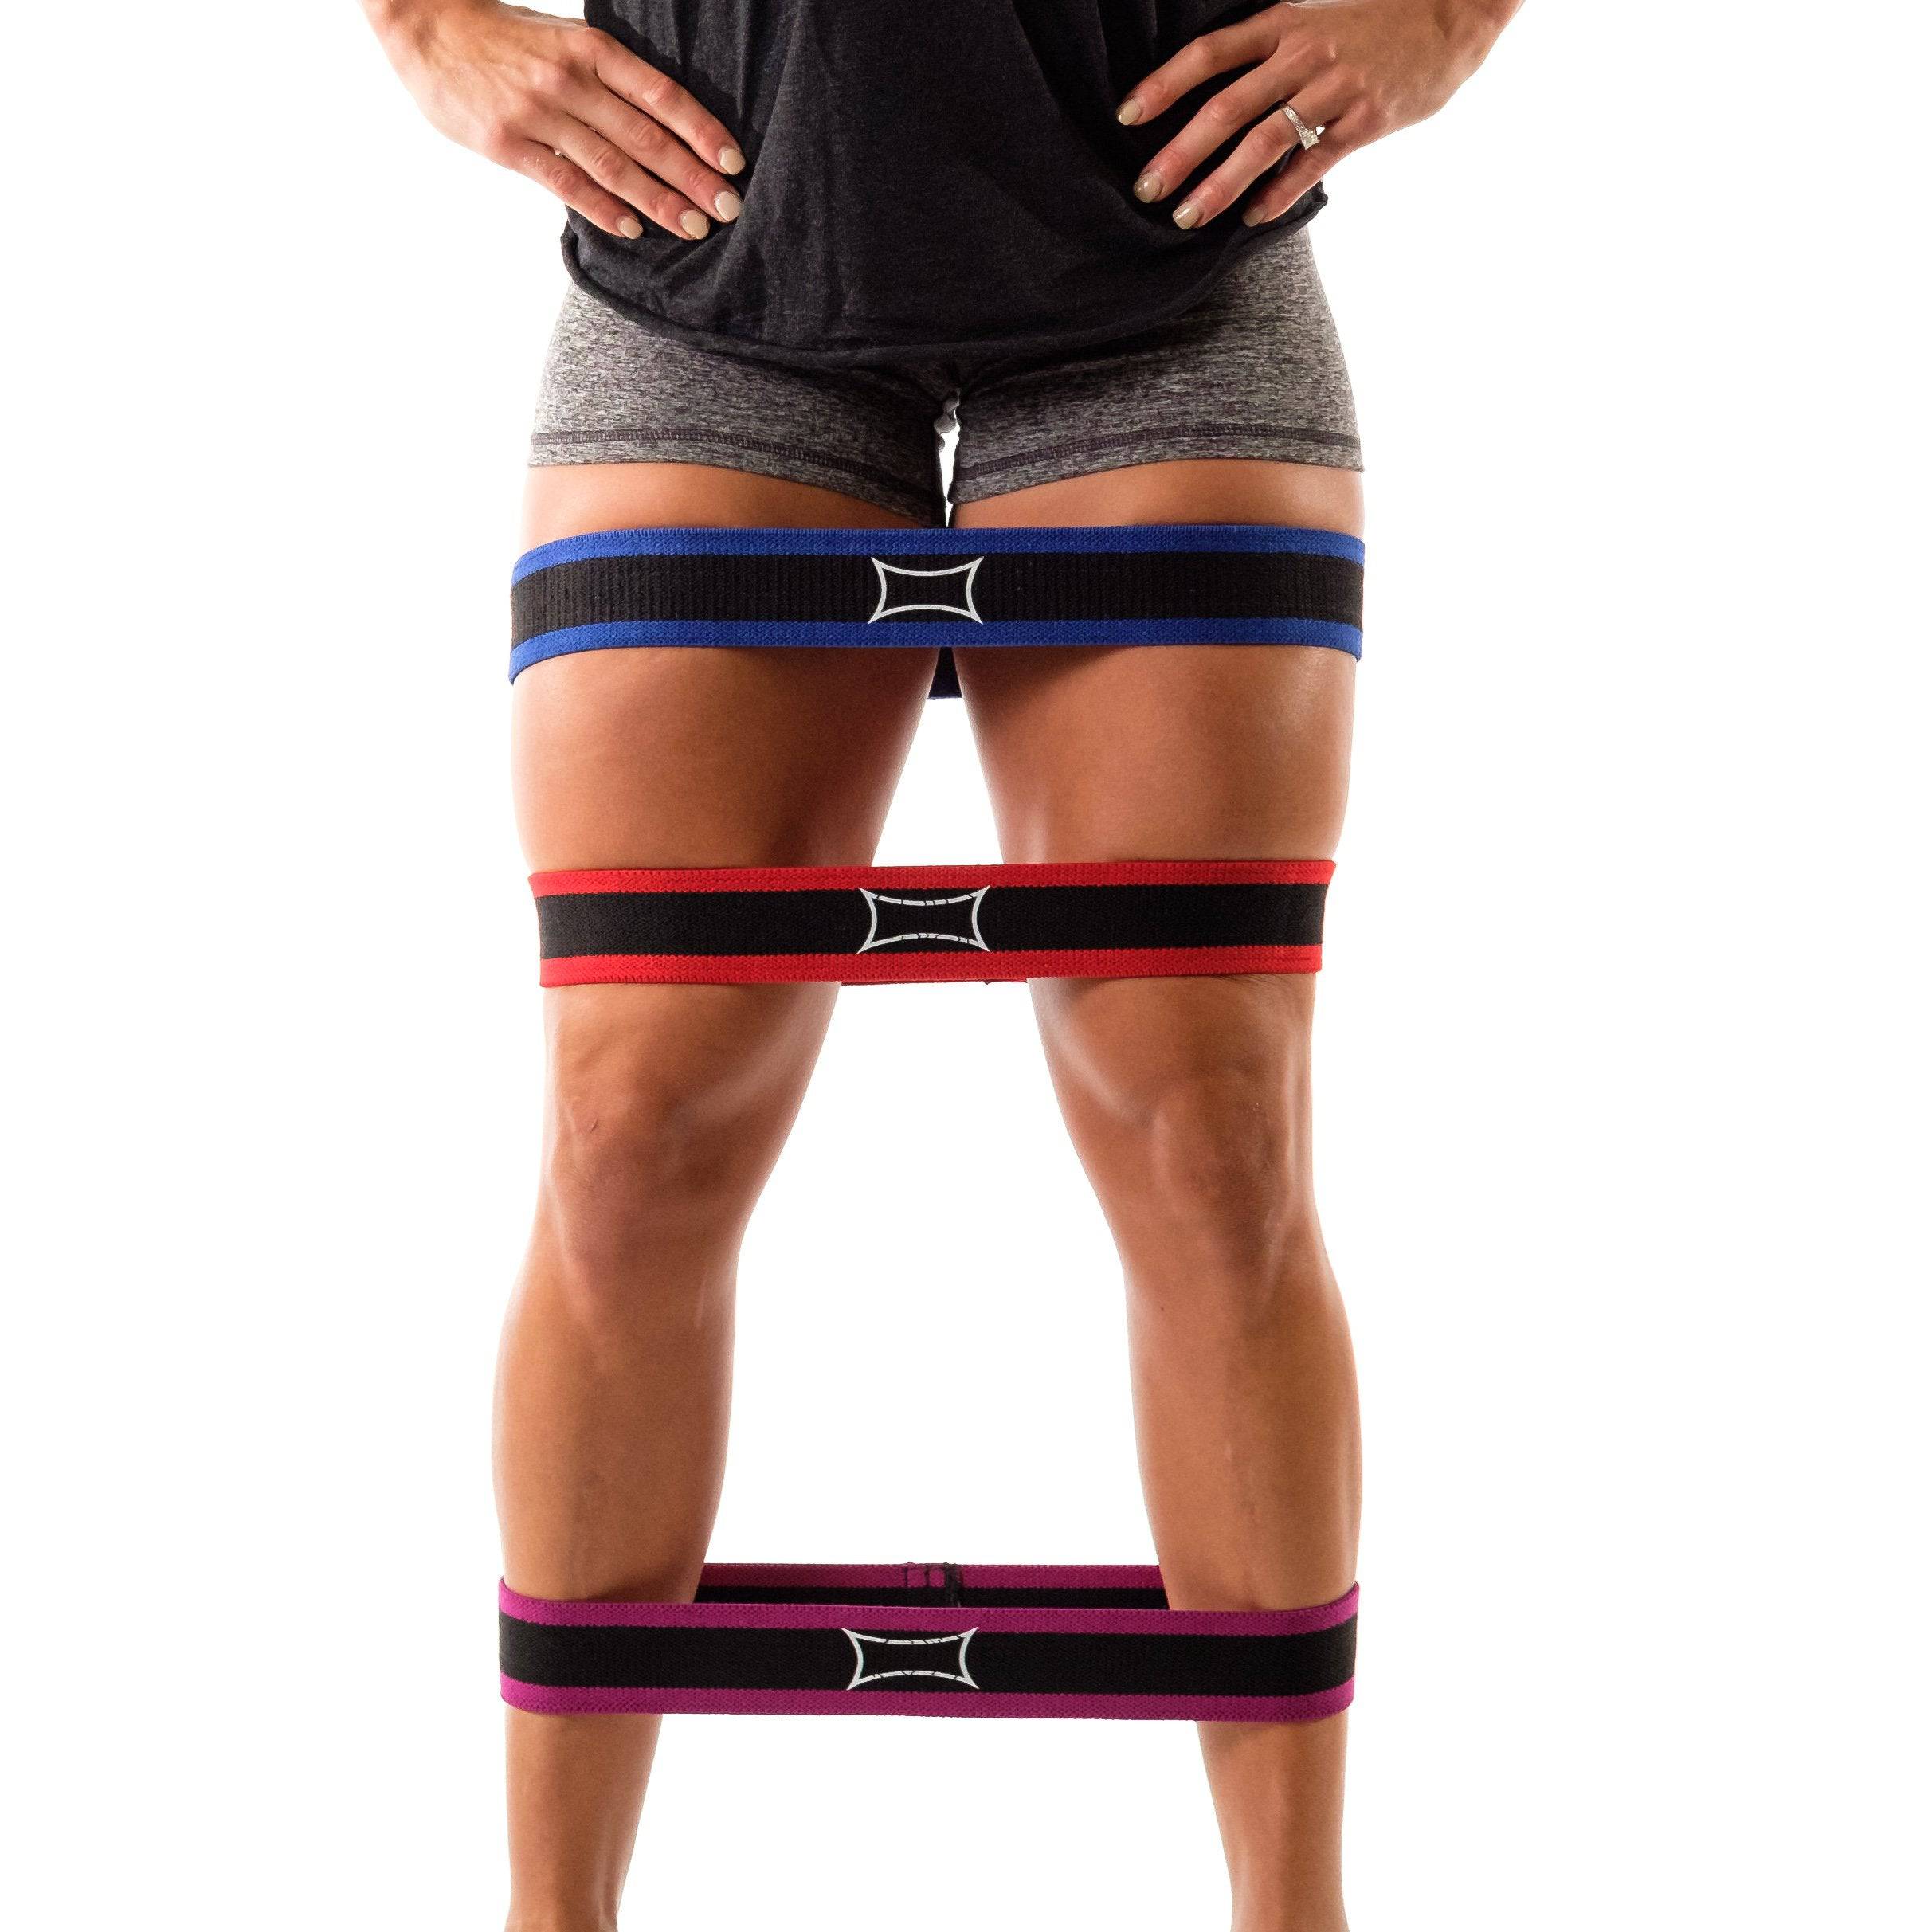 Sling Shot | Hip Circle - Sport Pack - XTC Fitness - Exercise Equipment Superstore - Canada - Hip Circles